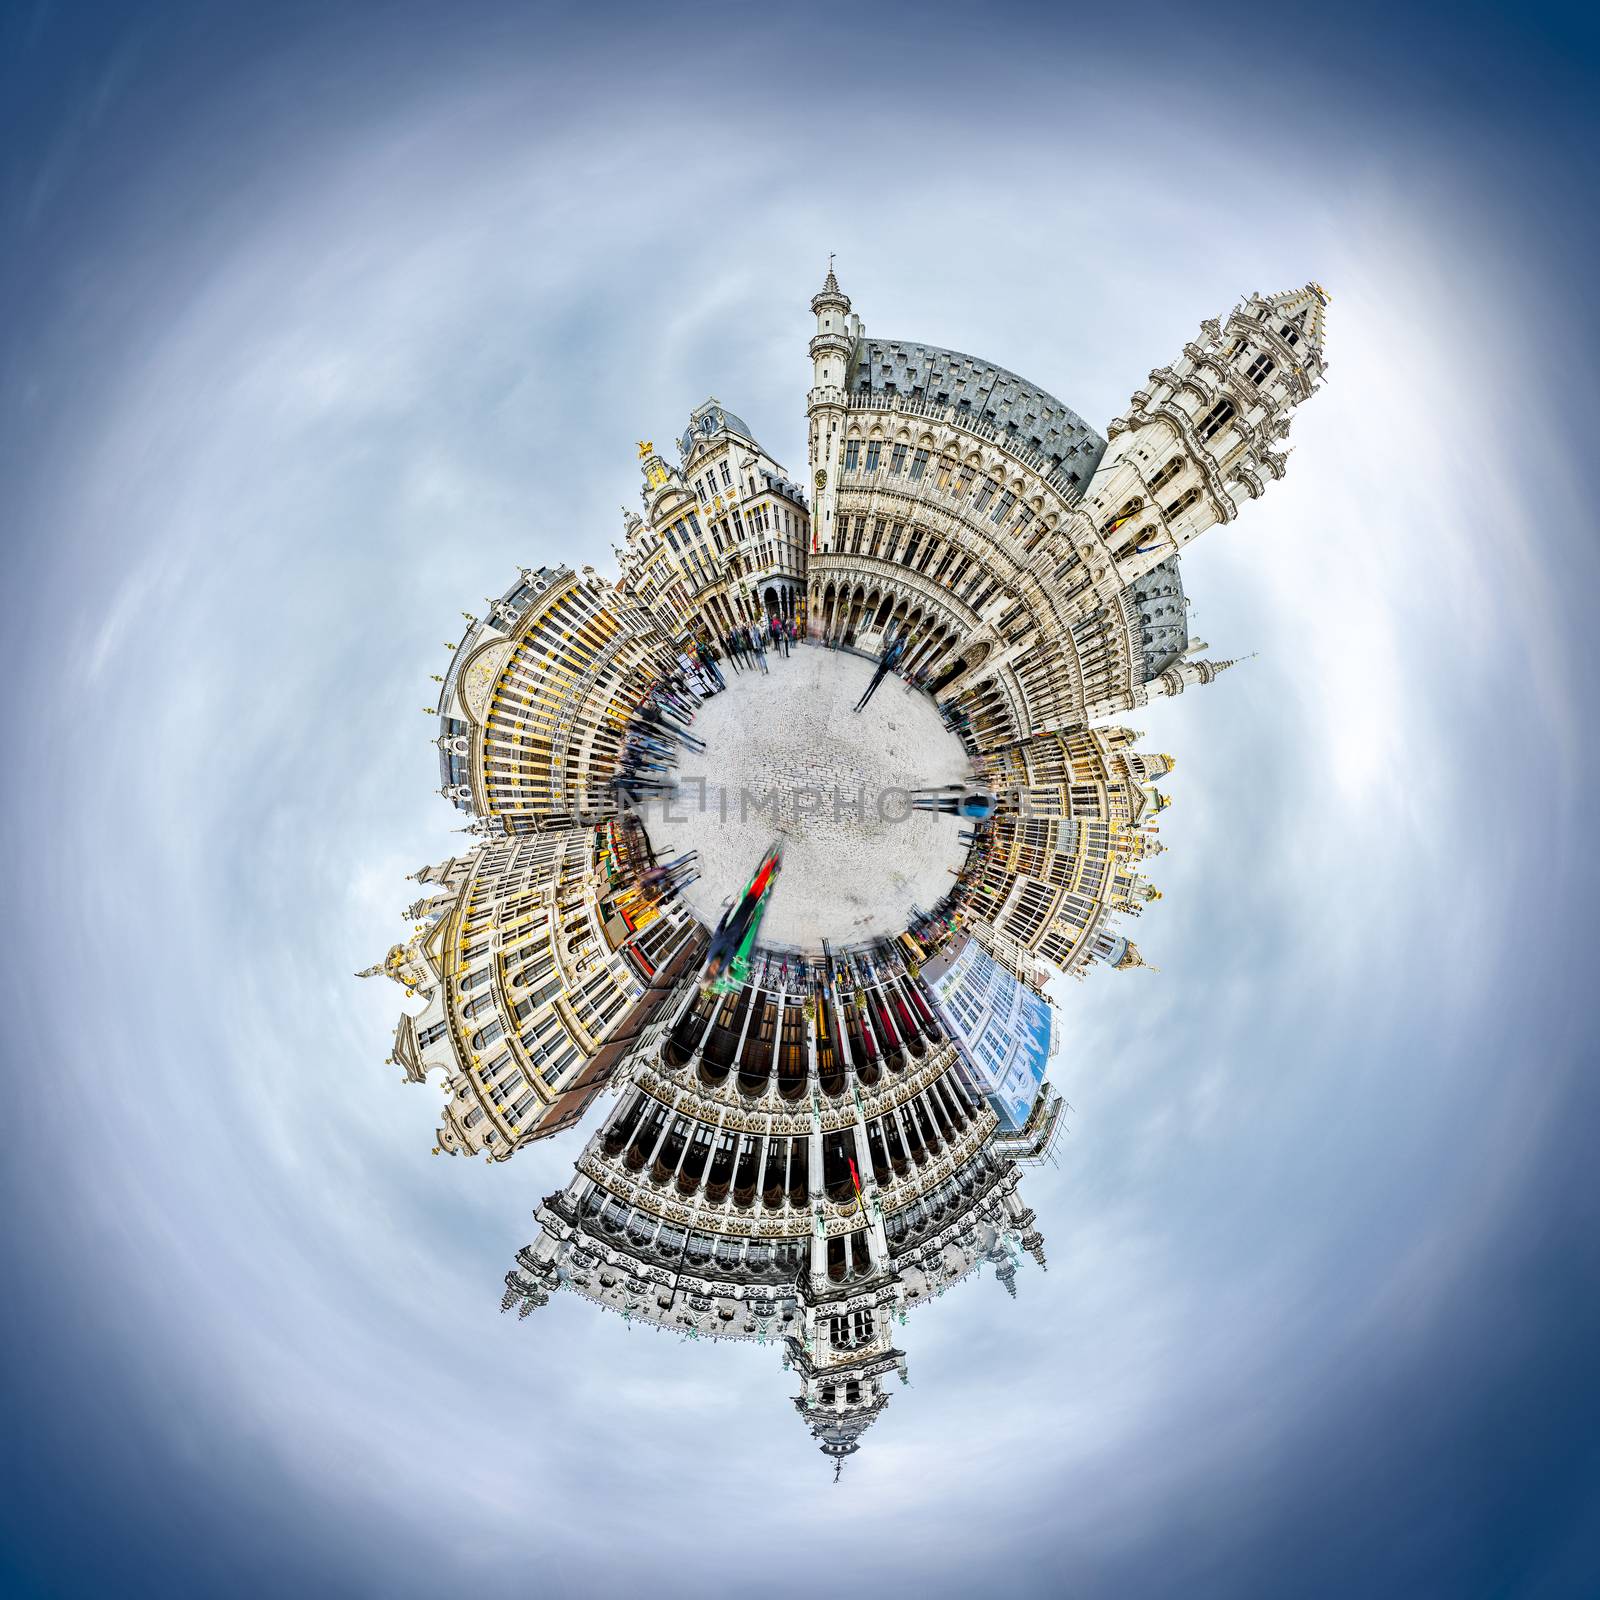 Brussels grand place panoramic montage from 16 HDR images